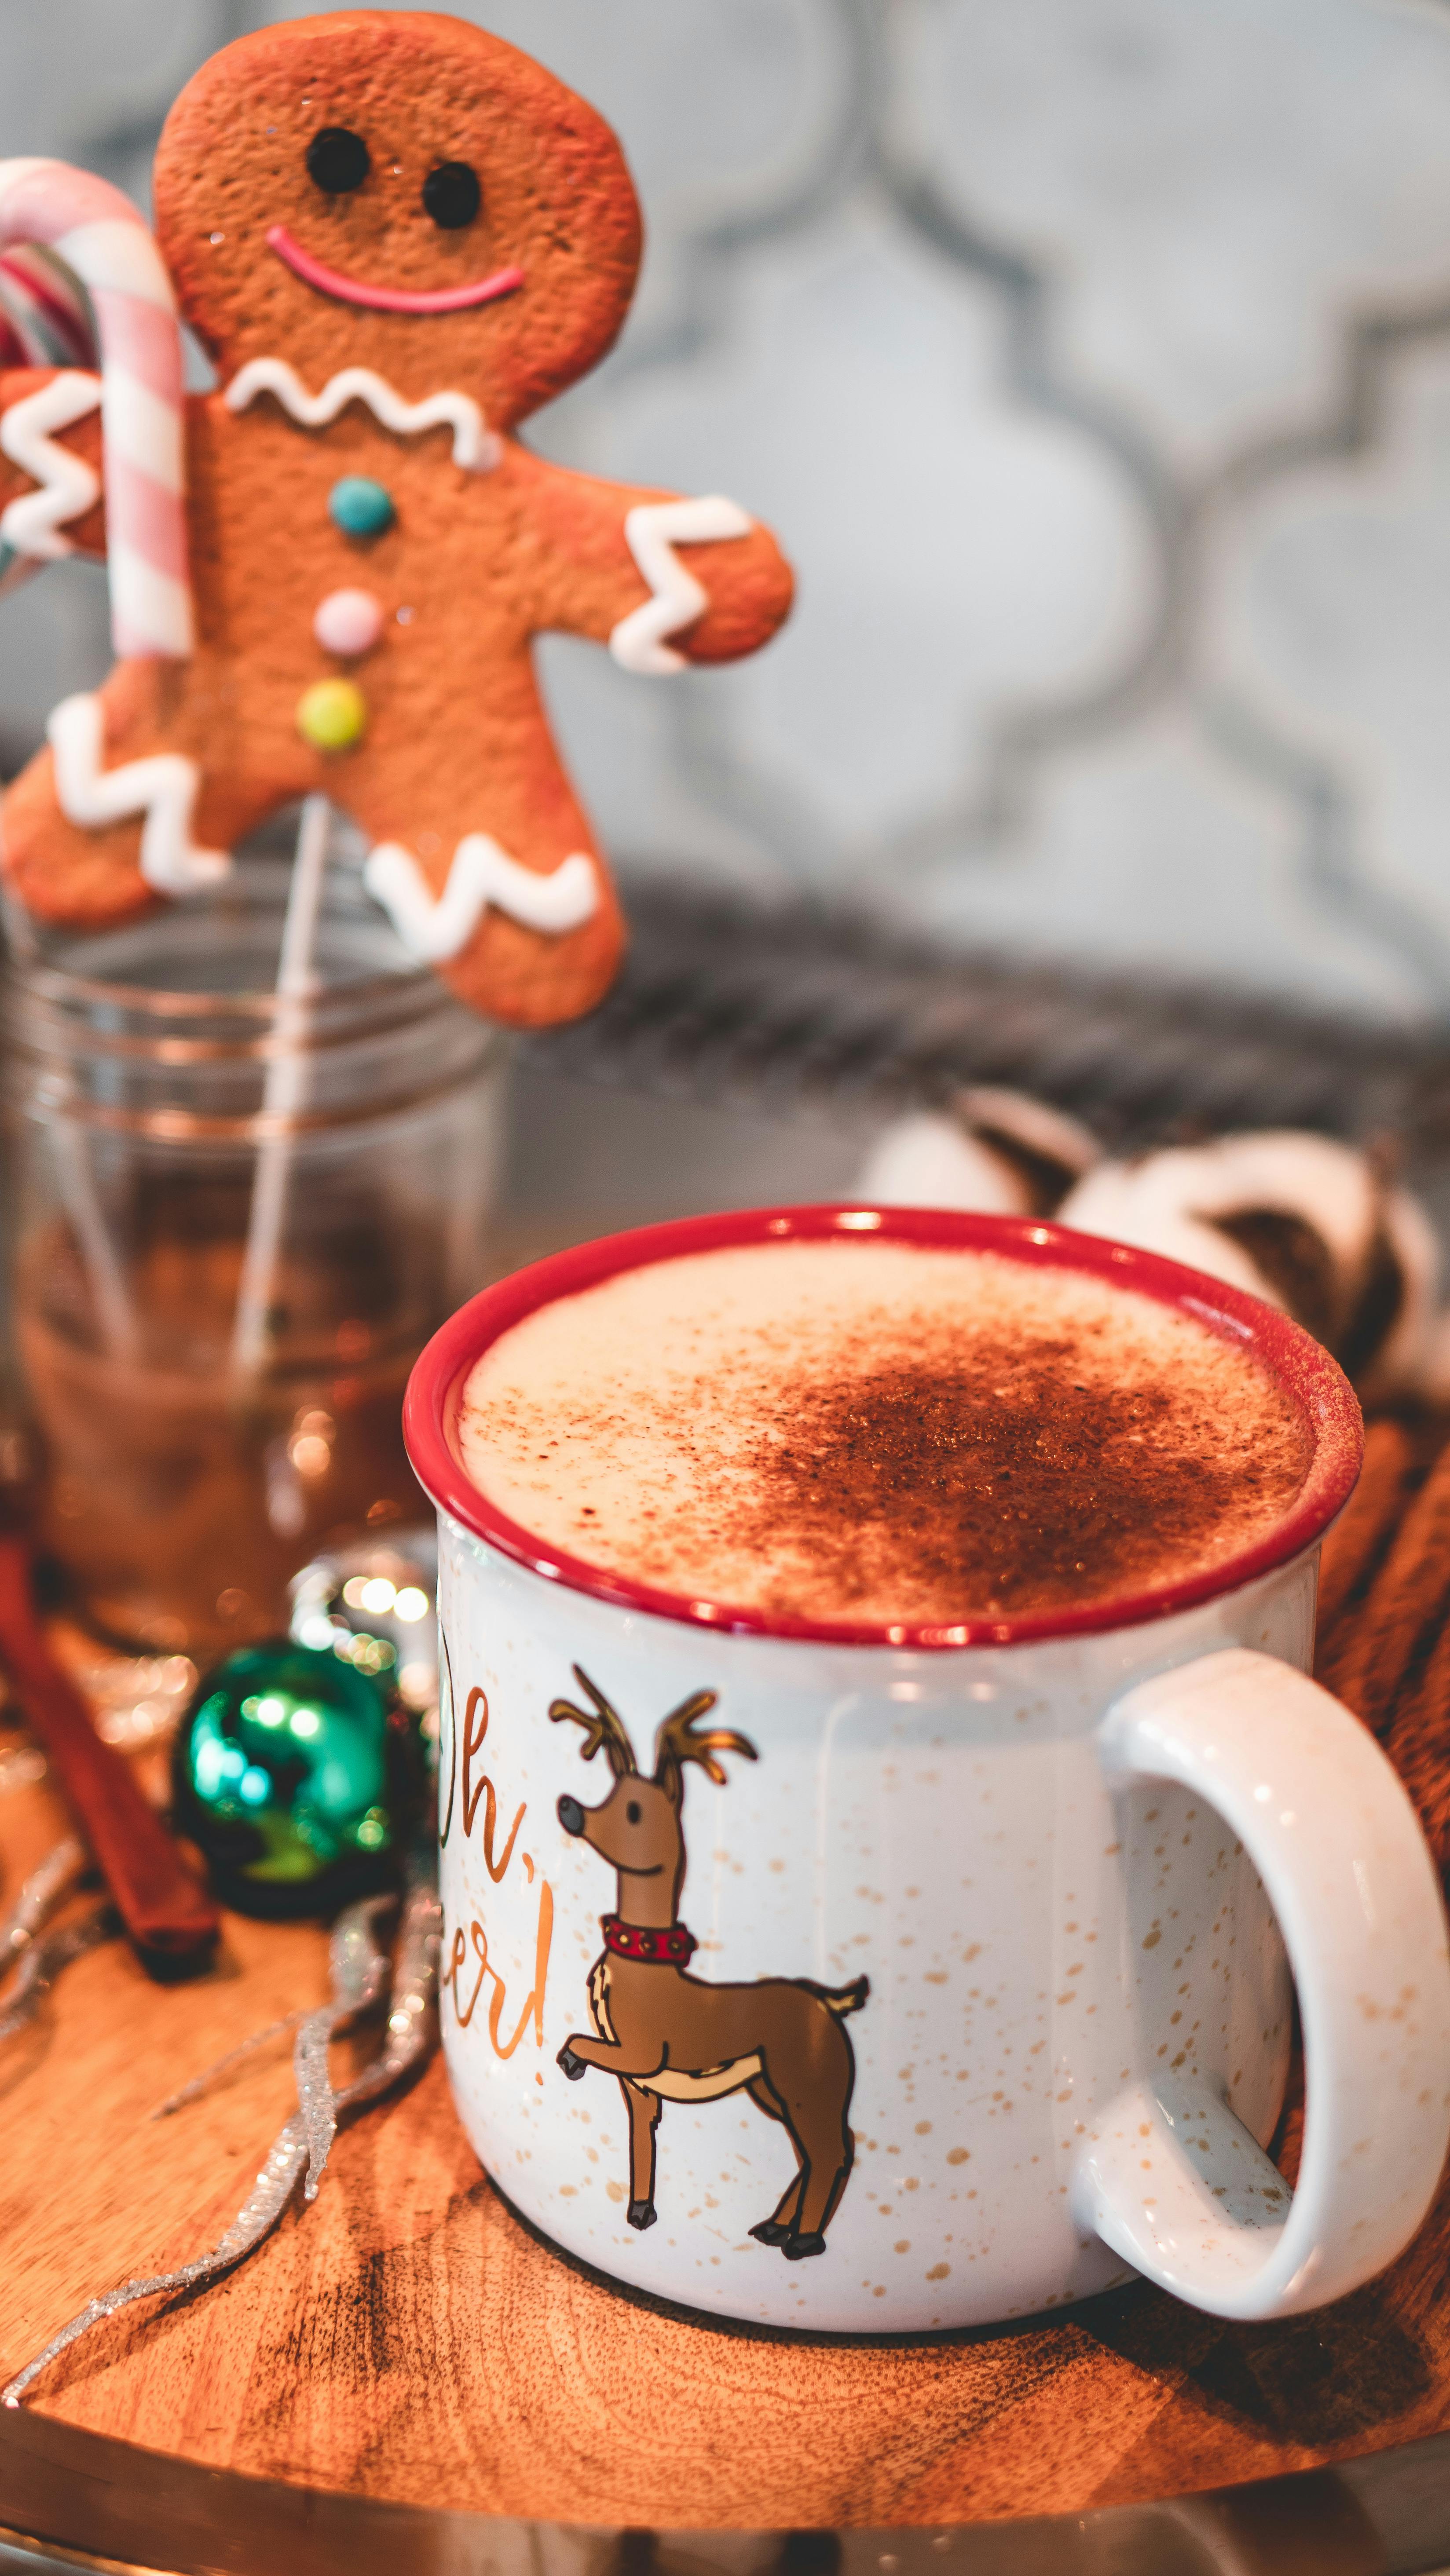 Free stock photo of drink, ginger bread, photoshoot